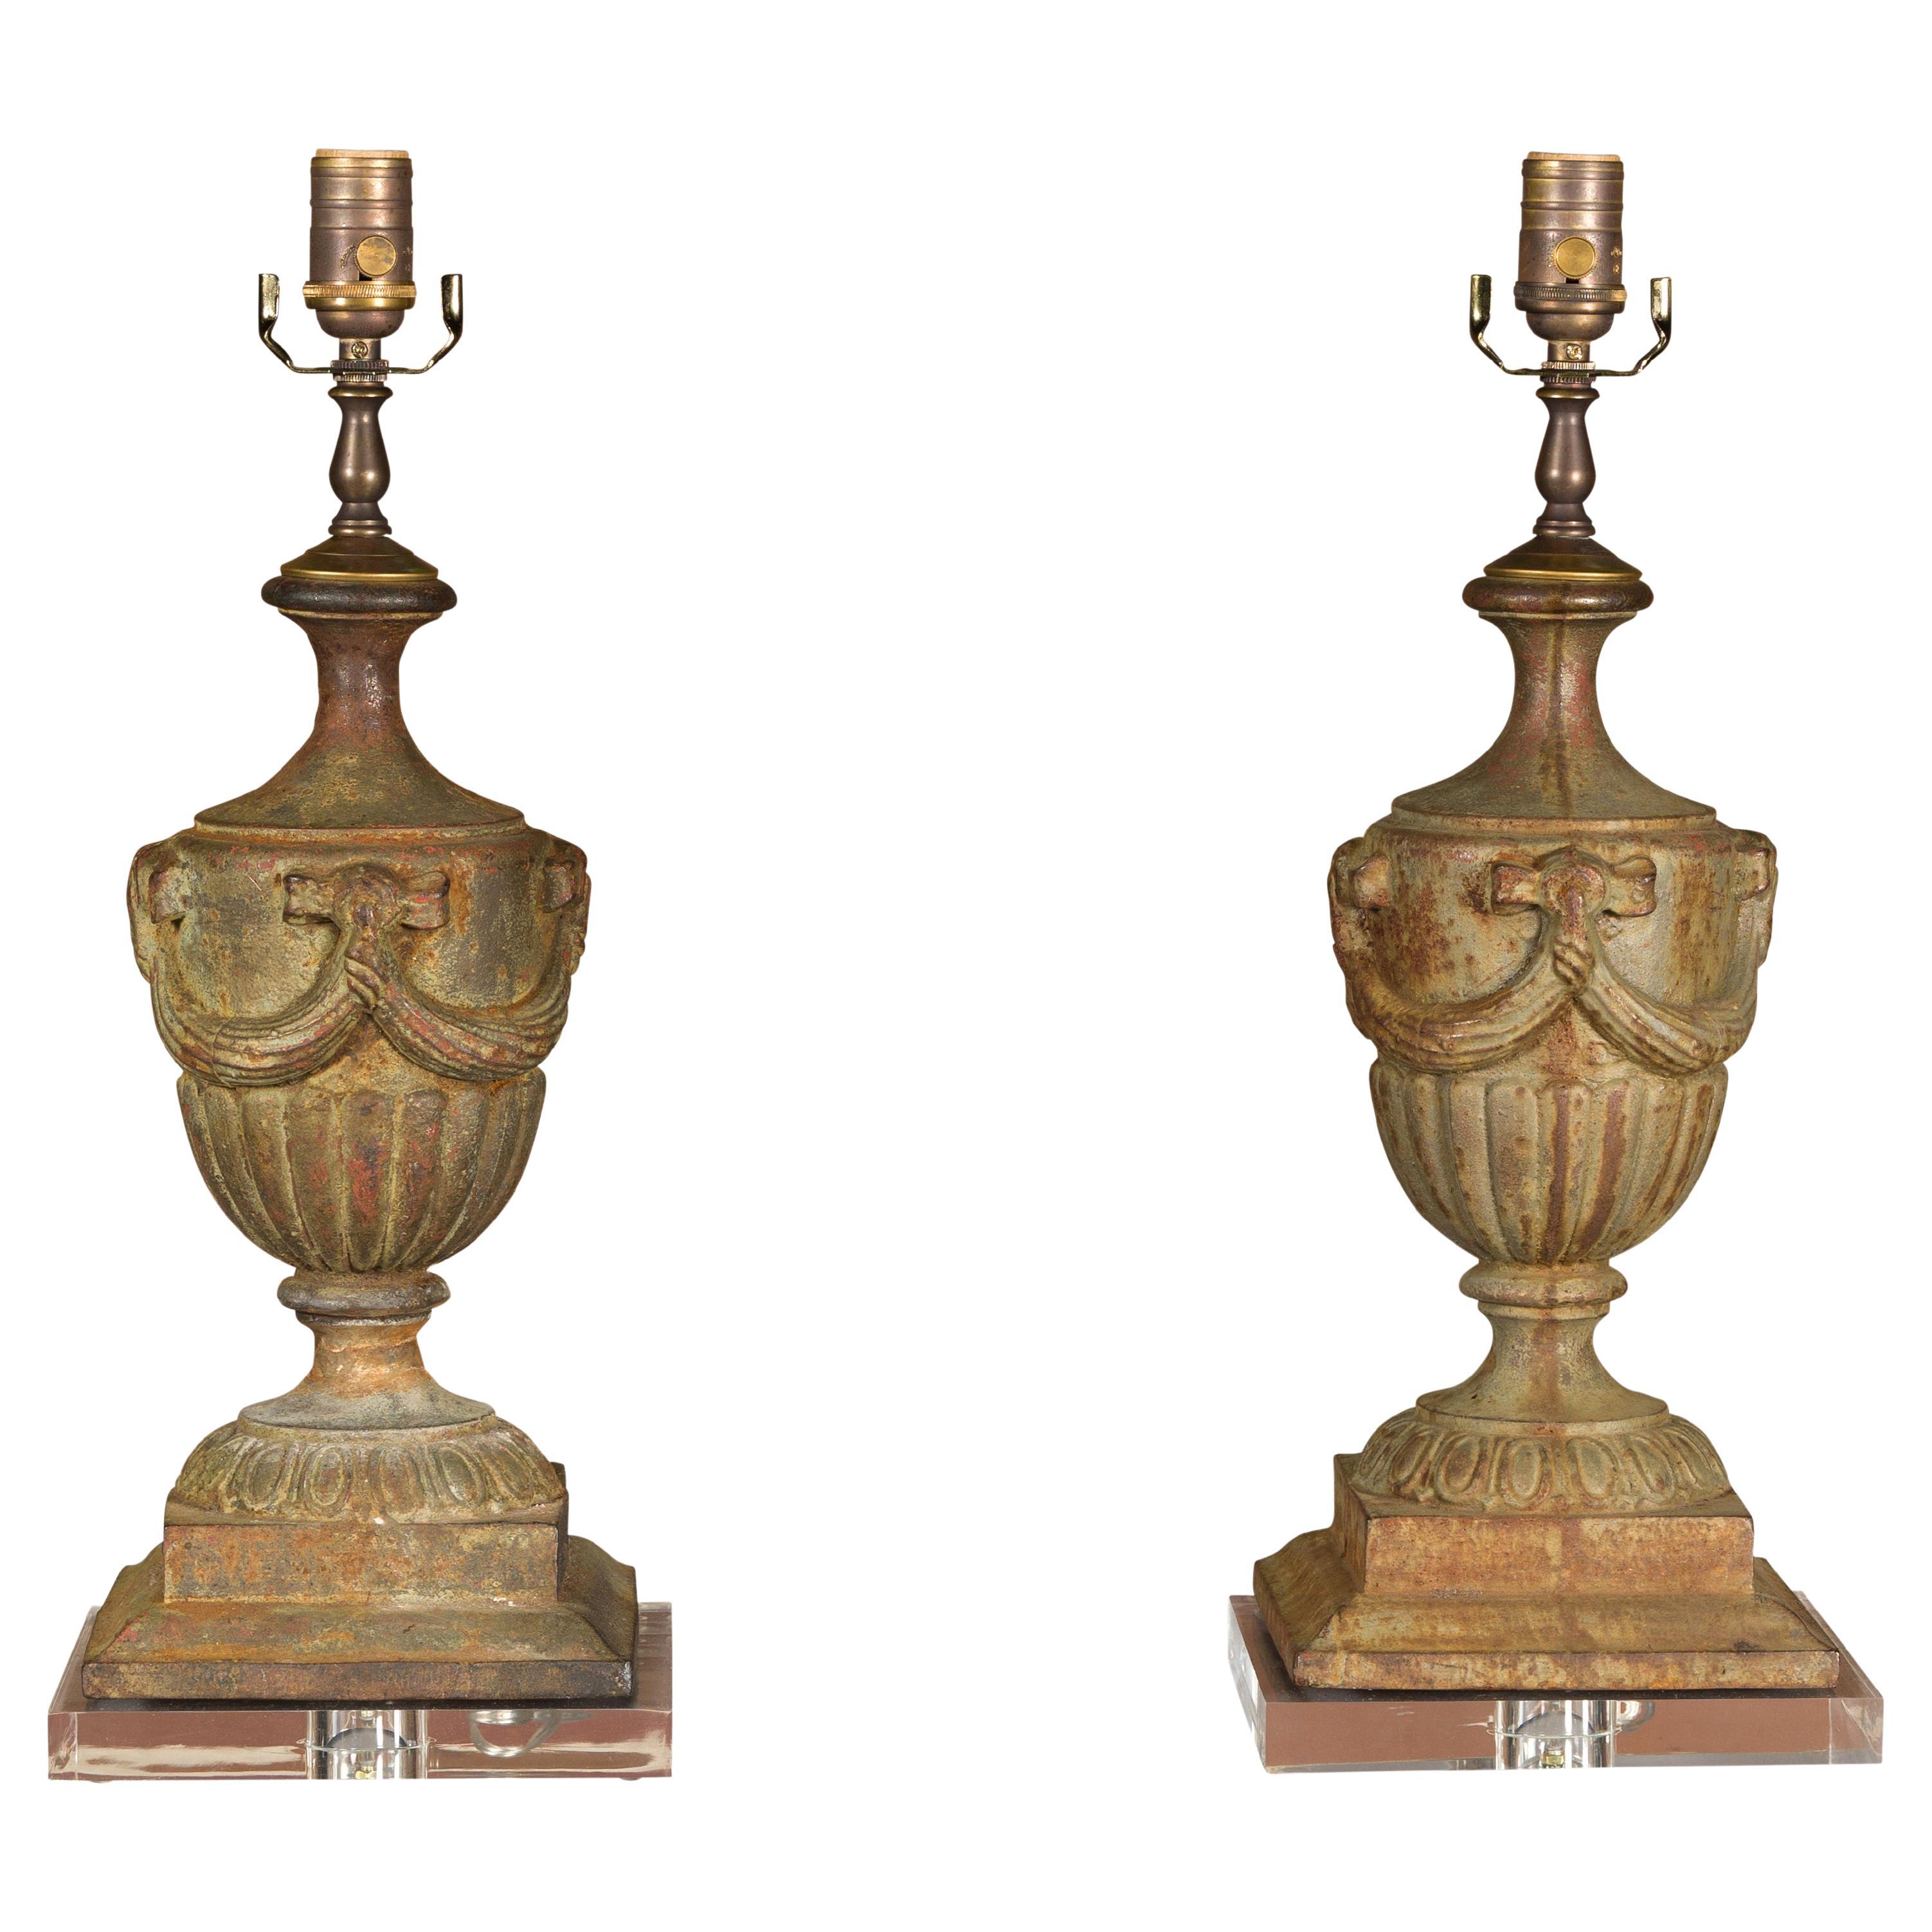 Neoclassical Style Midcentury Iron Table Lamps on Lucite Bases, a Pair For Sale